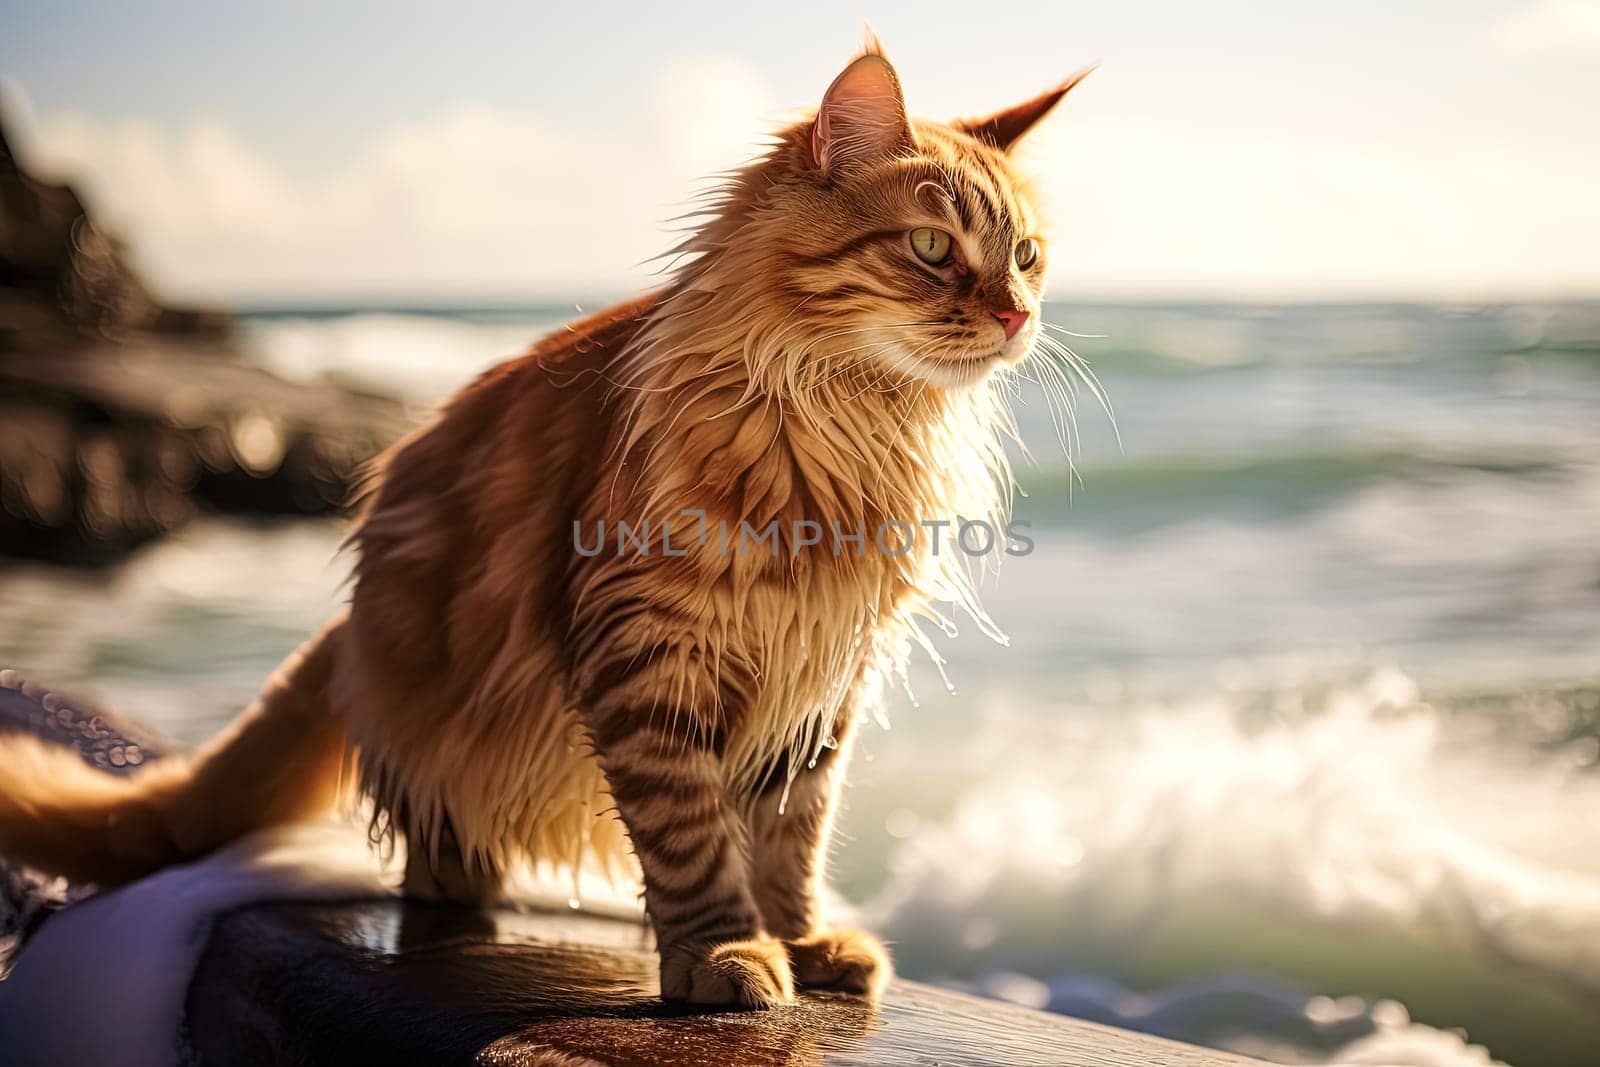 A cat with long fur is sitting on a ledge near the water. The cat appears to be staring off into the distance, possibly watching the waves or just enjoying the view. The scene has a calm